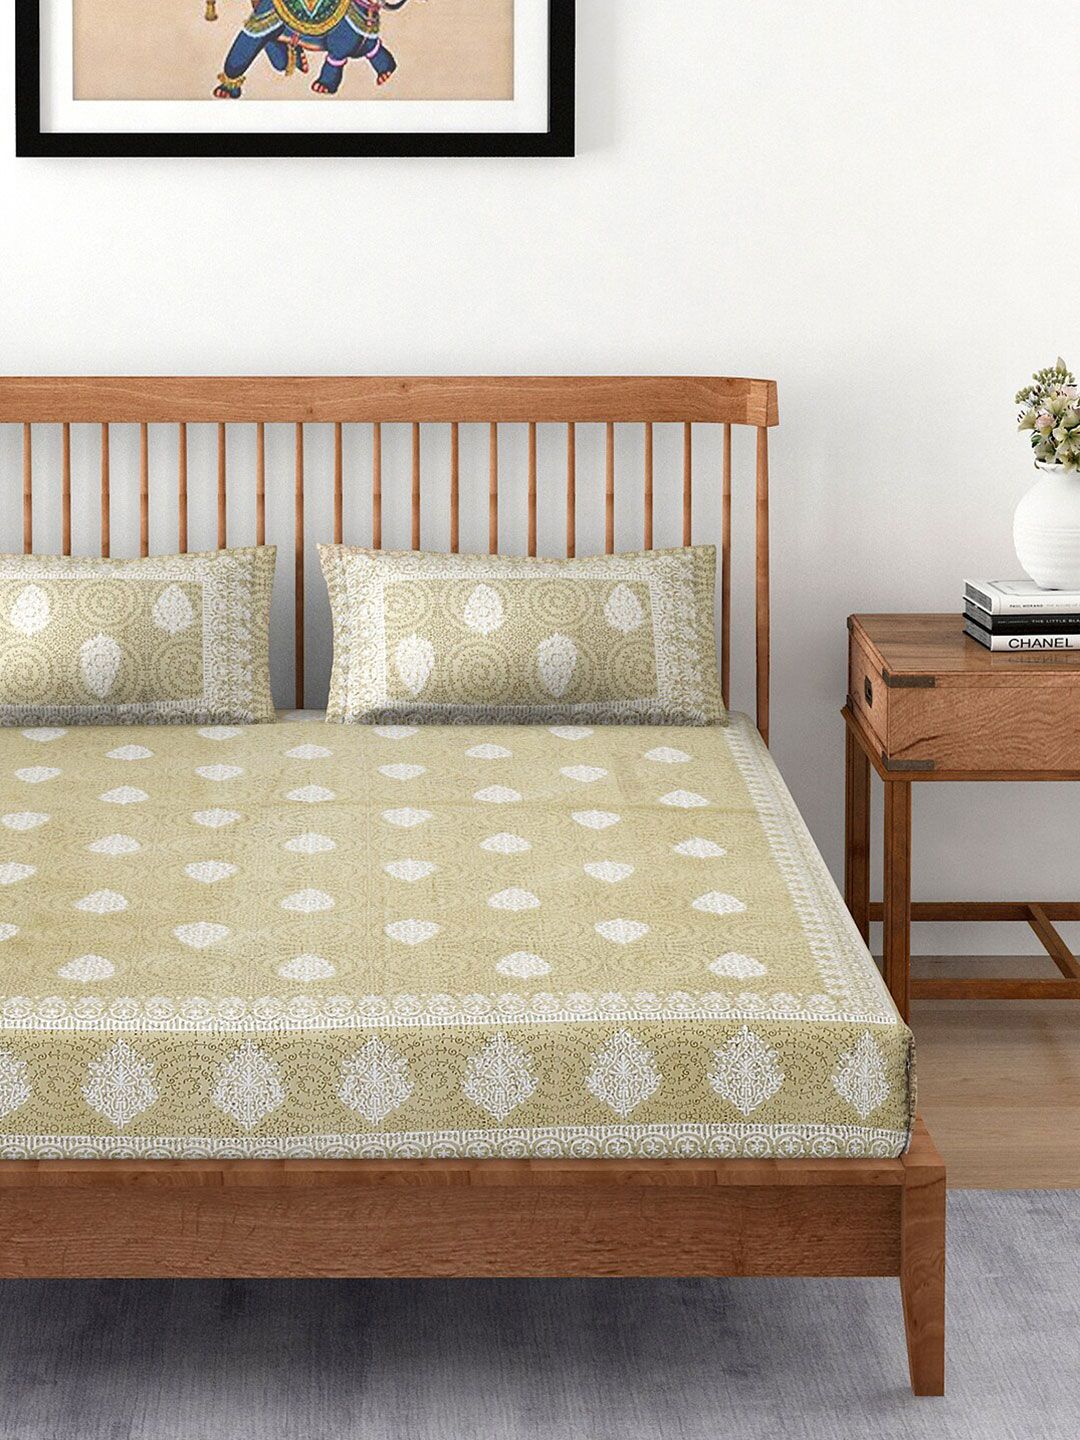 EK BY EKTA KAPOOR Beige & White Ethnic Motifs 120 TC Pure Cotton King Bedsheet with 2 Pillow Covers Price in India